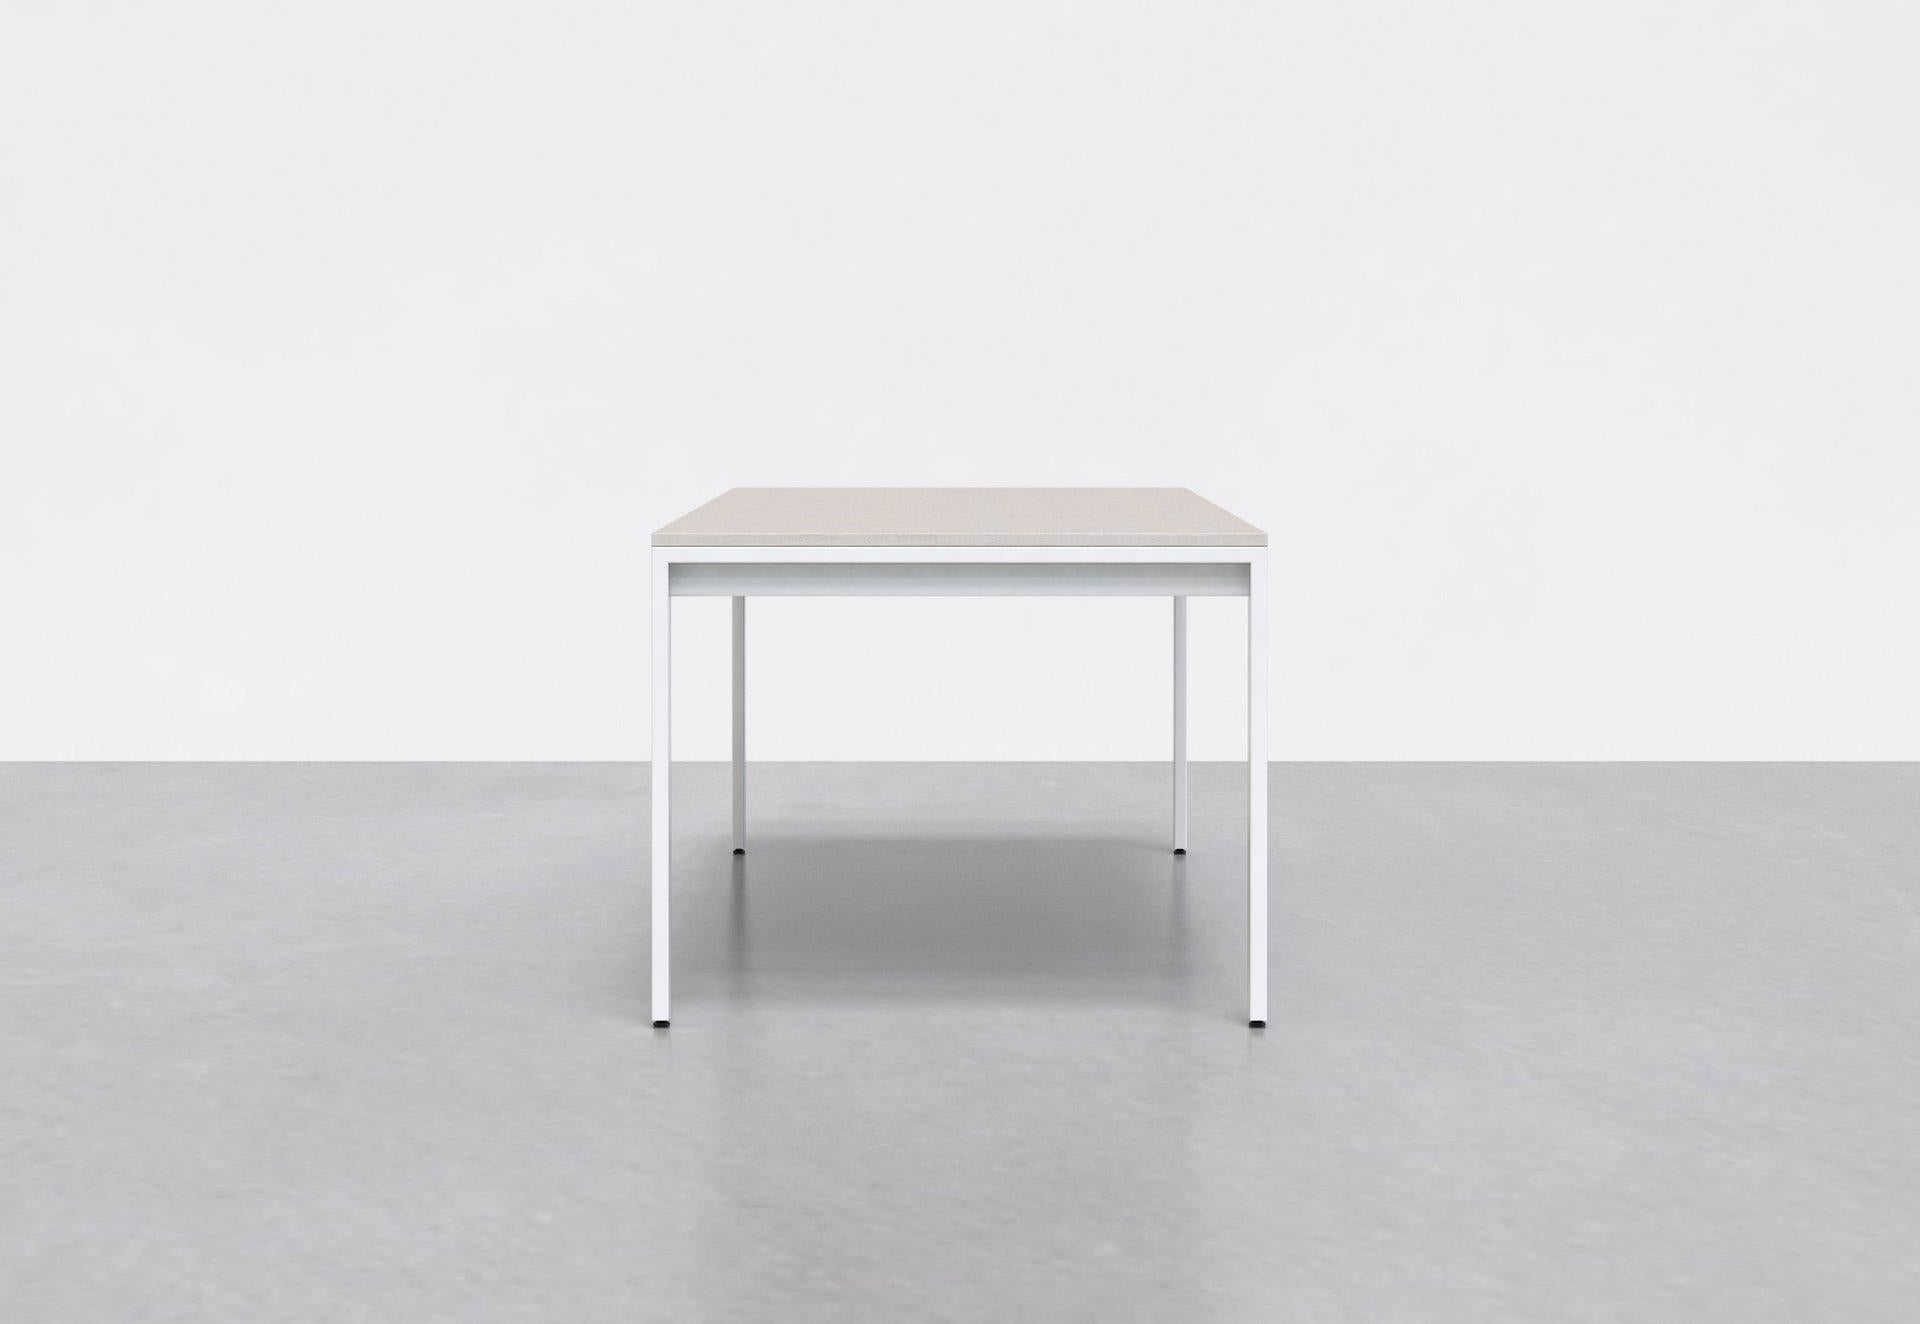 The band table is a lightweight version of our minim conference tables.

Whether you're sharing ideas or meals, the band is great for gathering the team or family. Made with commercial grade materials and a sturdy steel base.